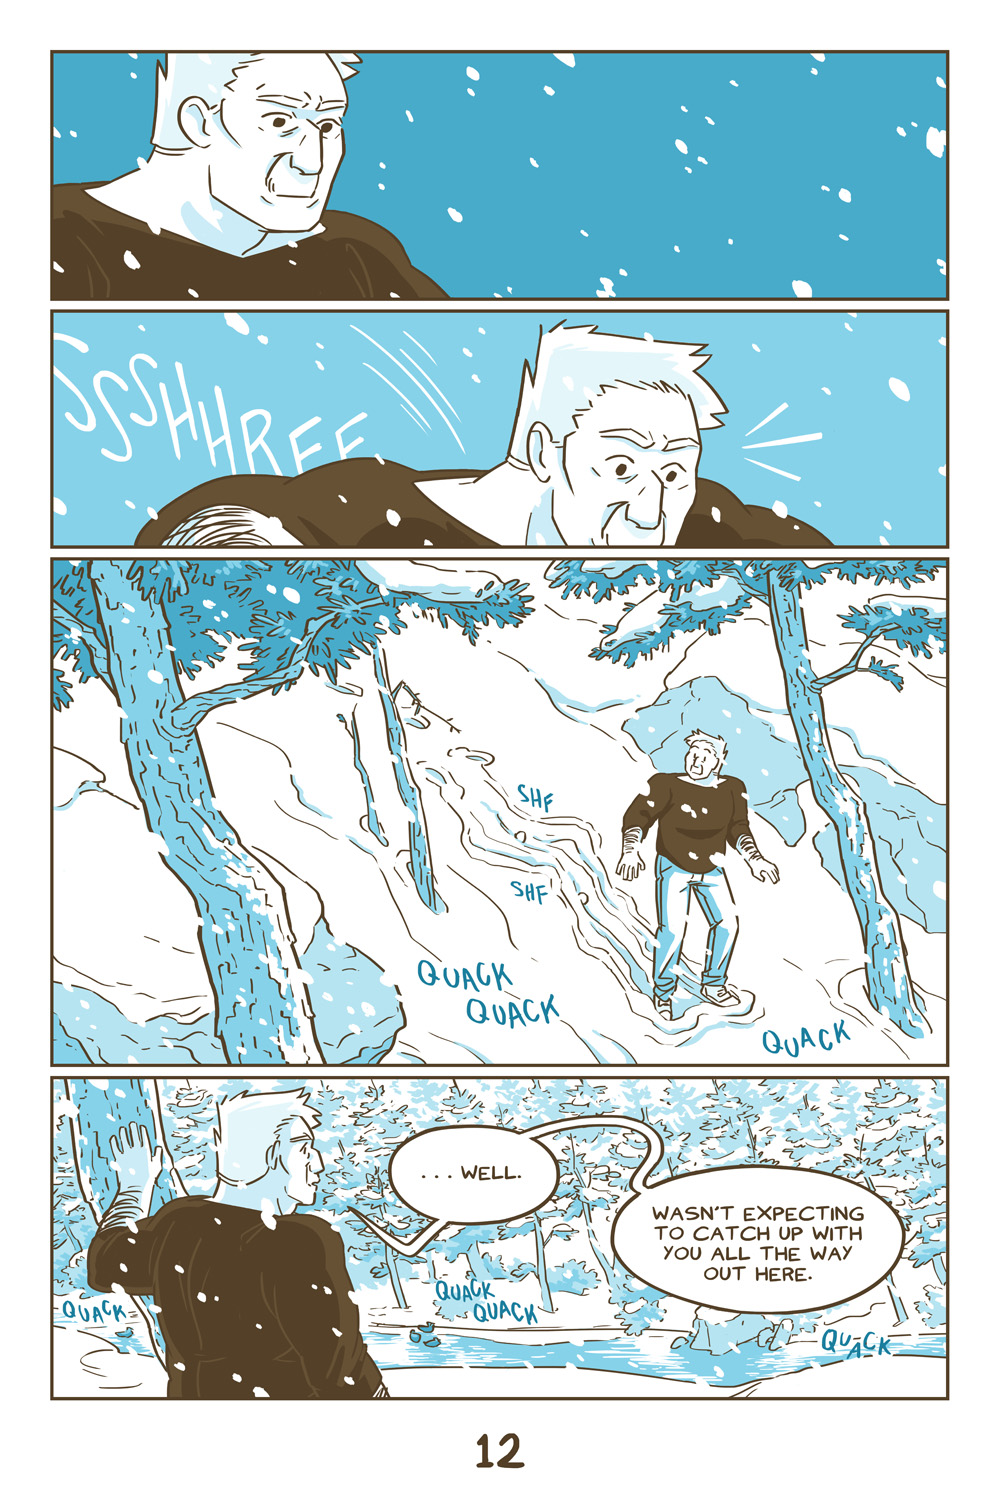 Chapter 7, Page 12